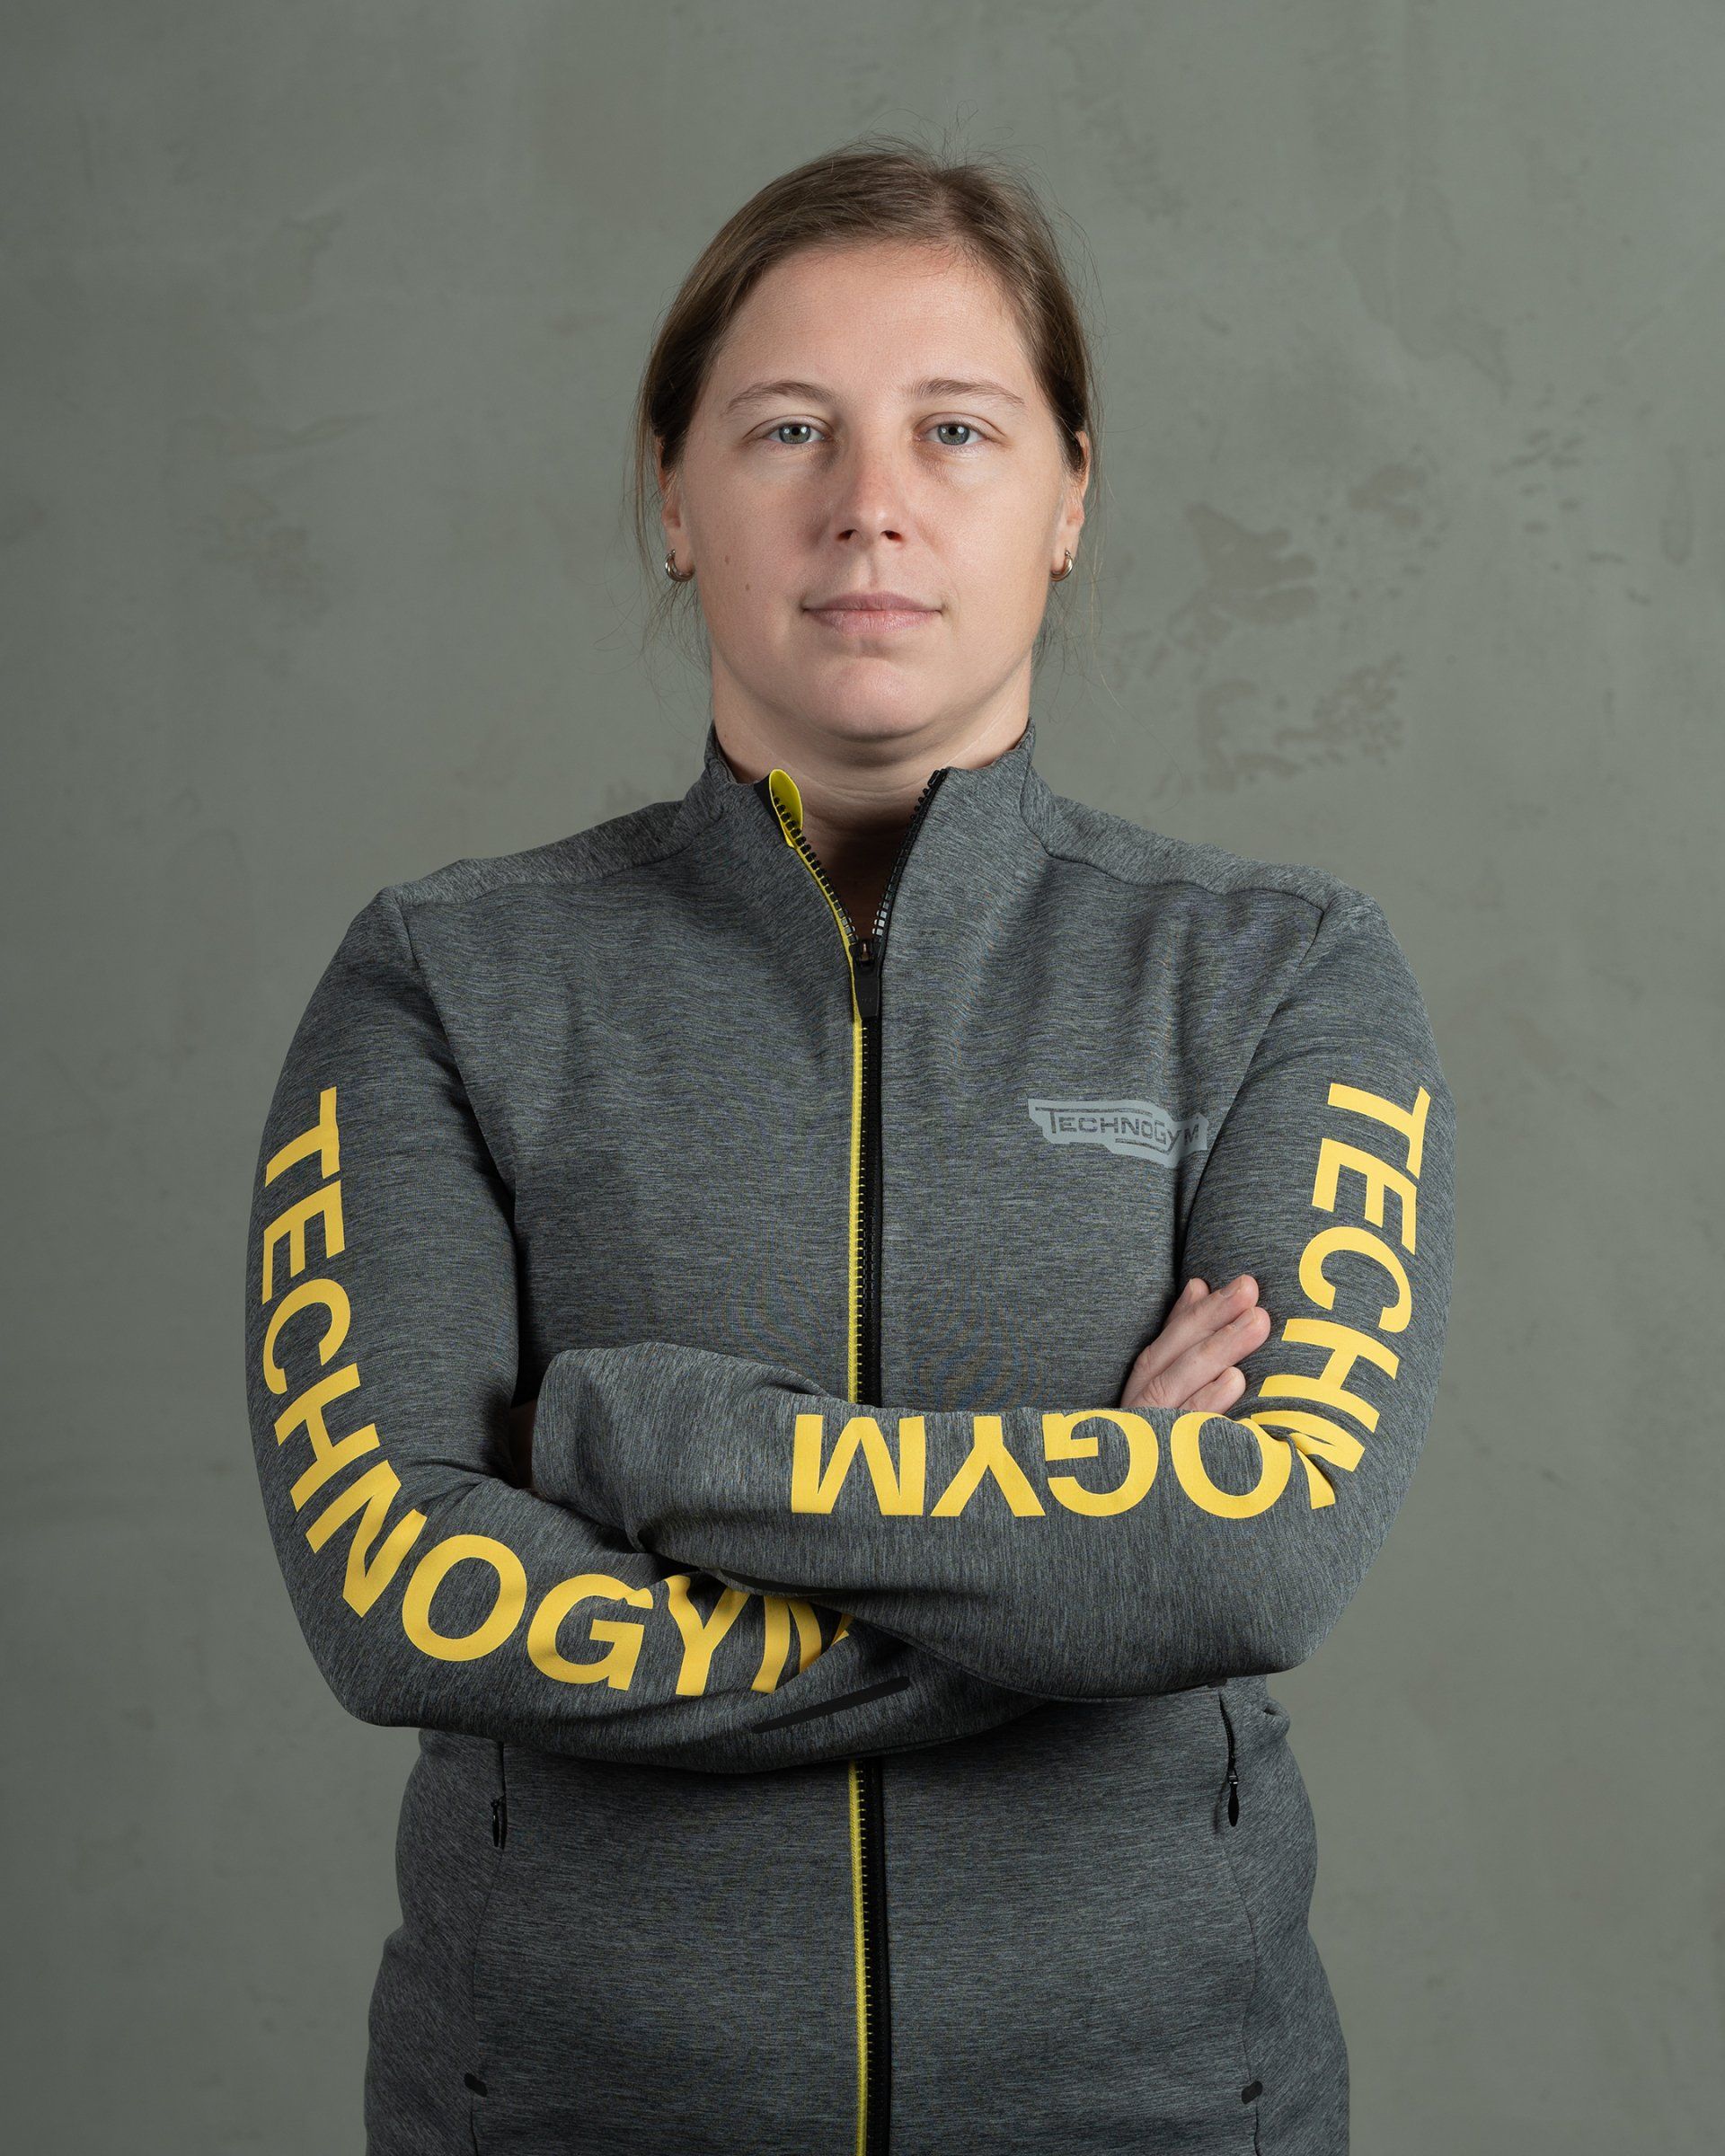 a woman with her arms crossed wearing a jacket that says technogym on the sleeves